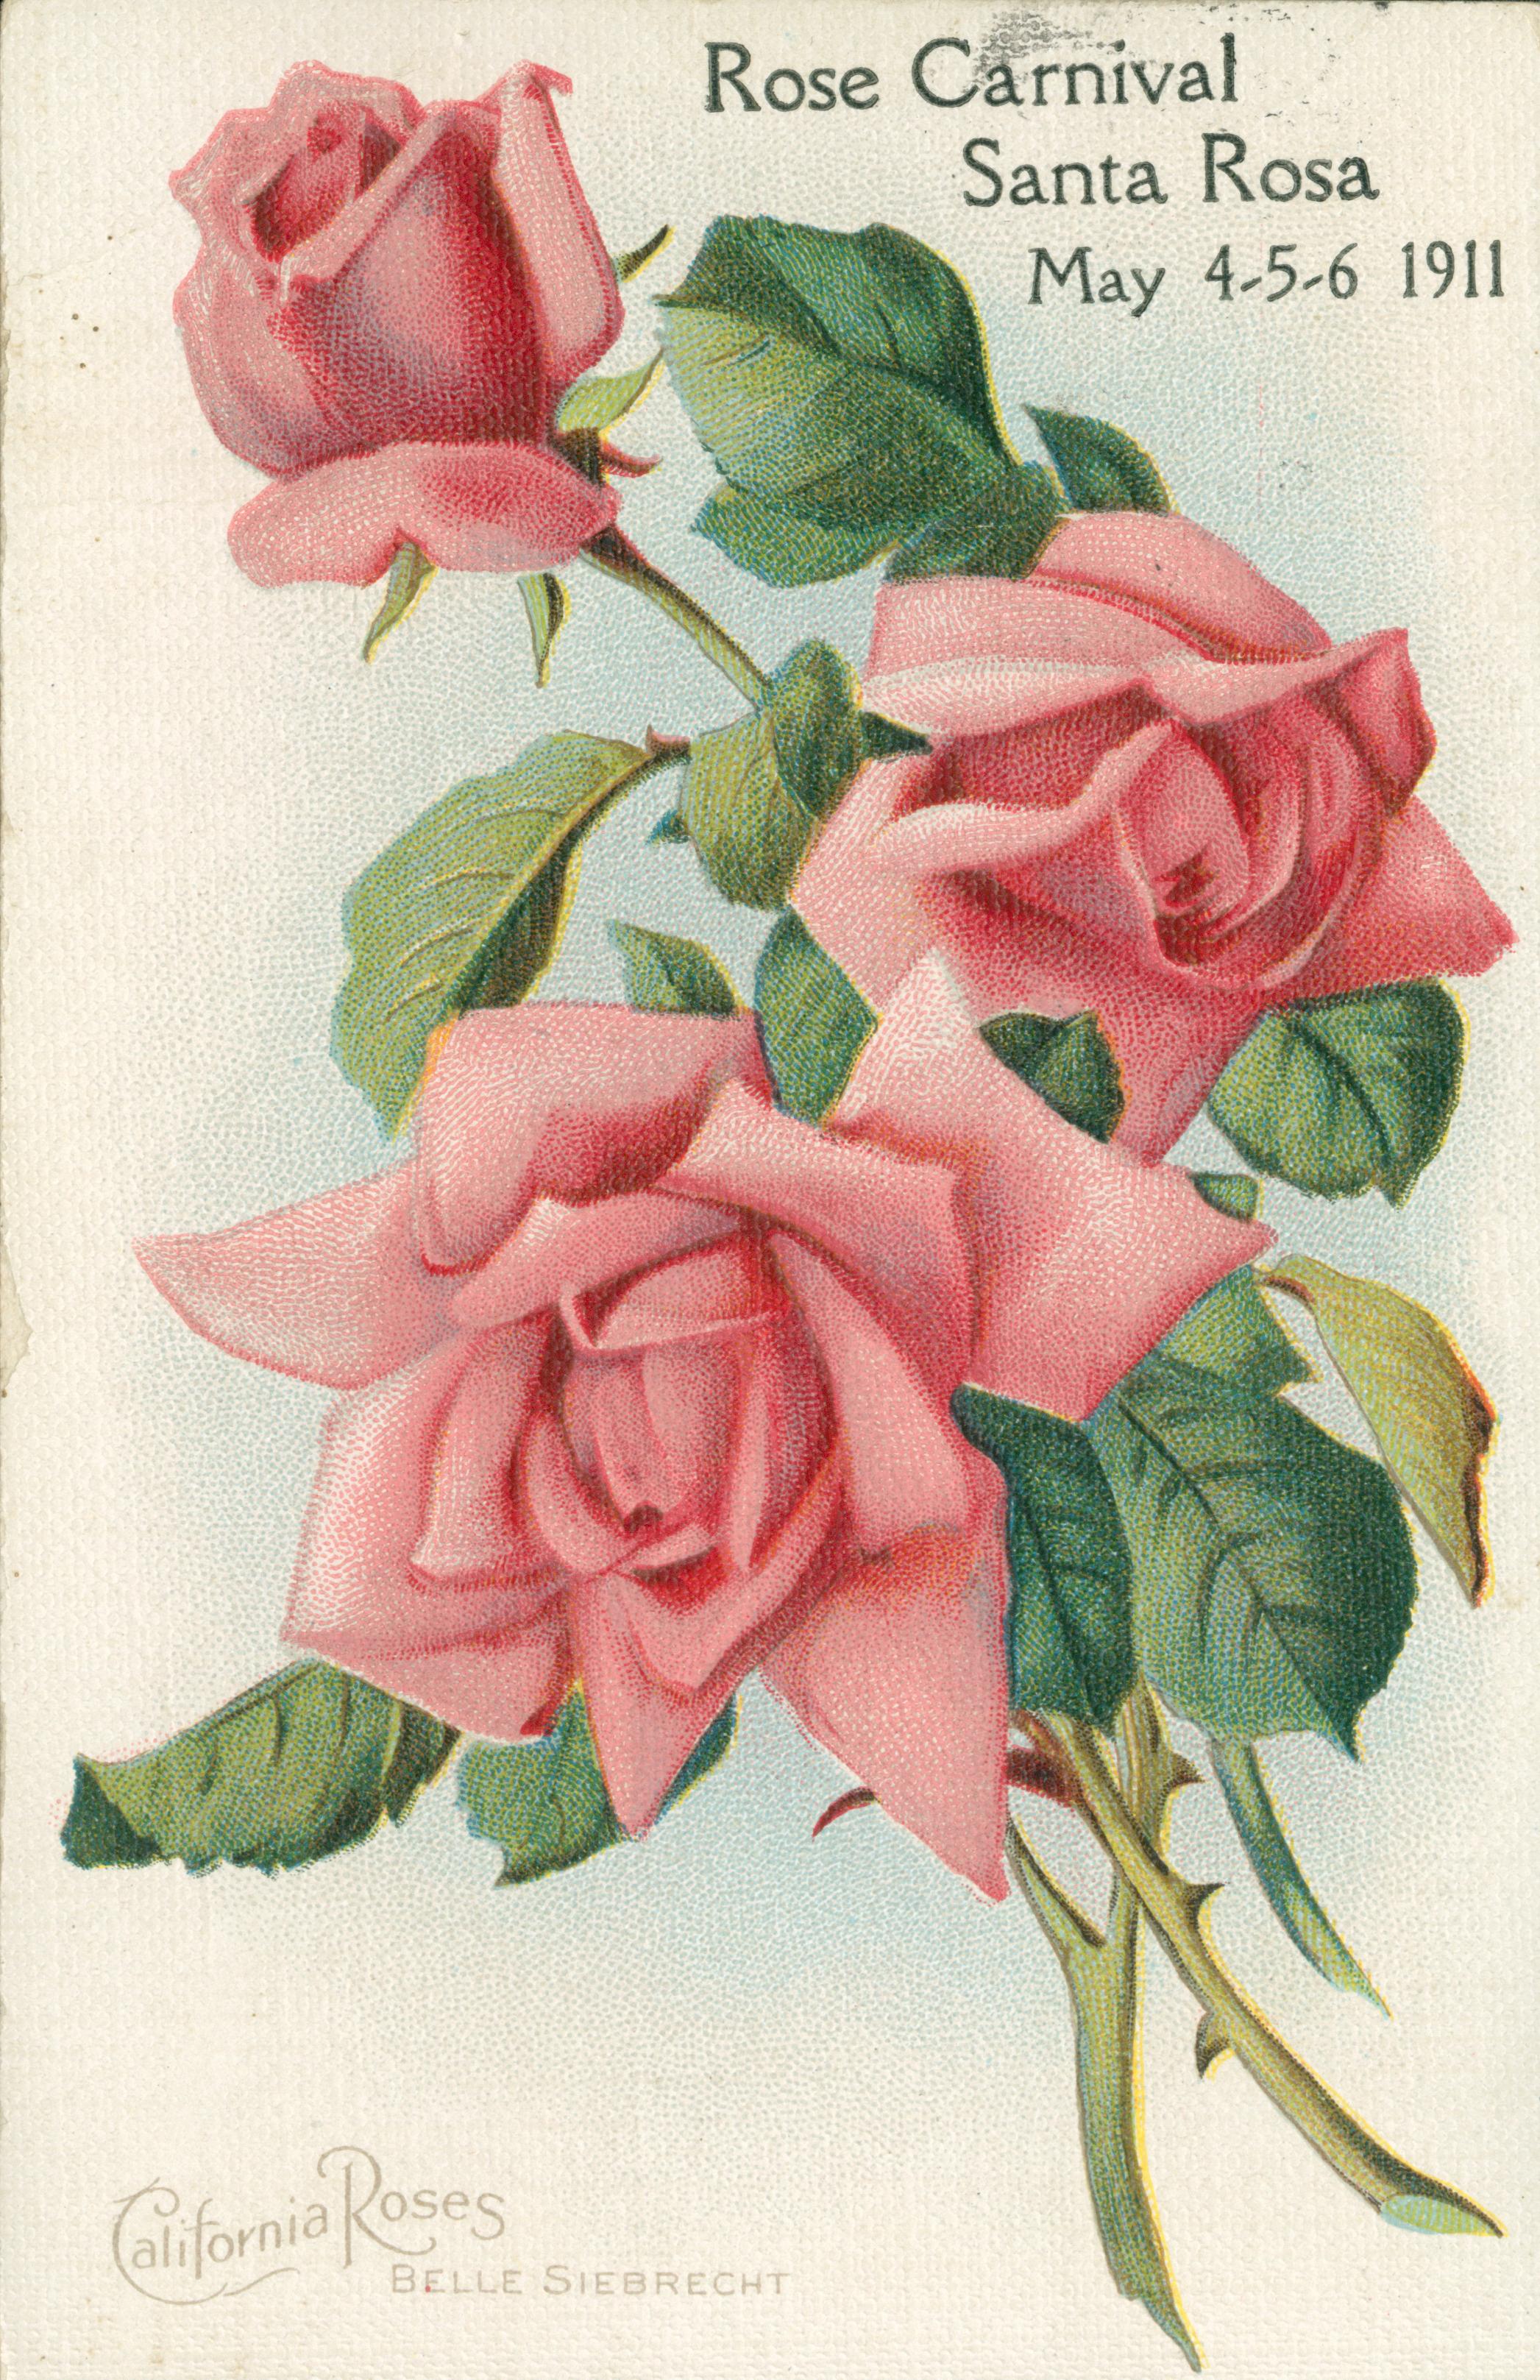 Shows a bunch of three roses